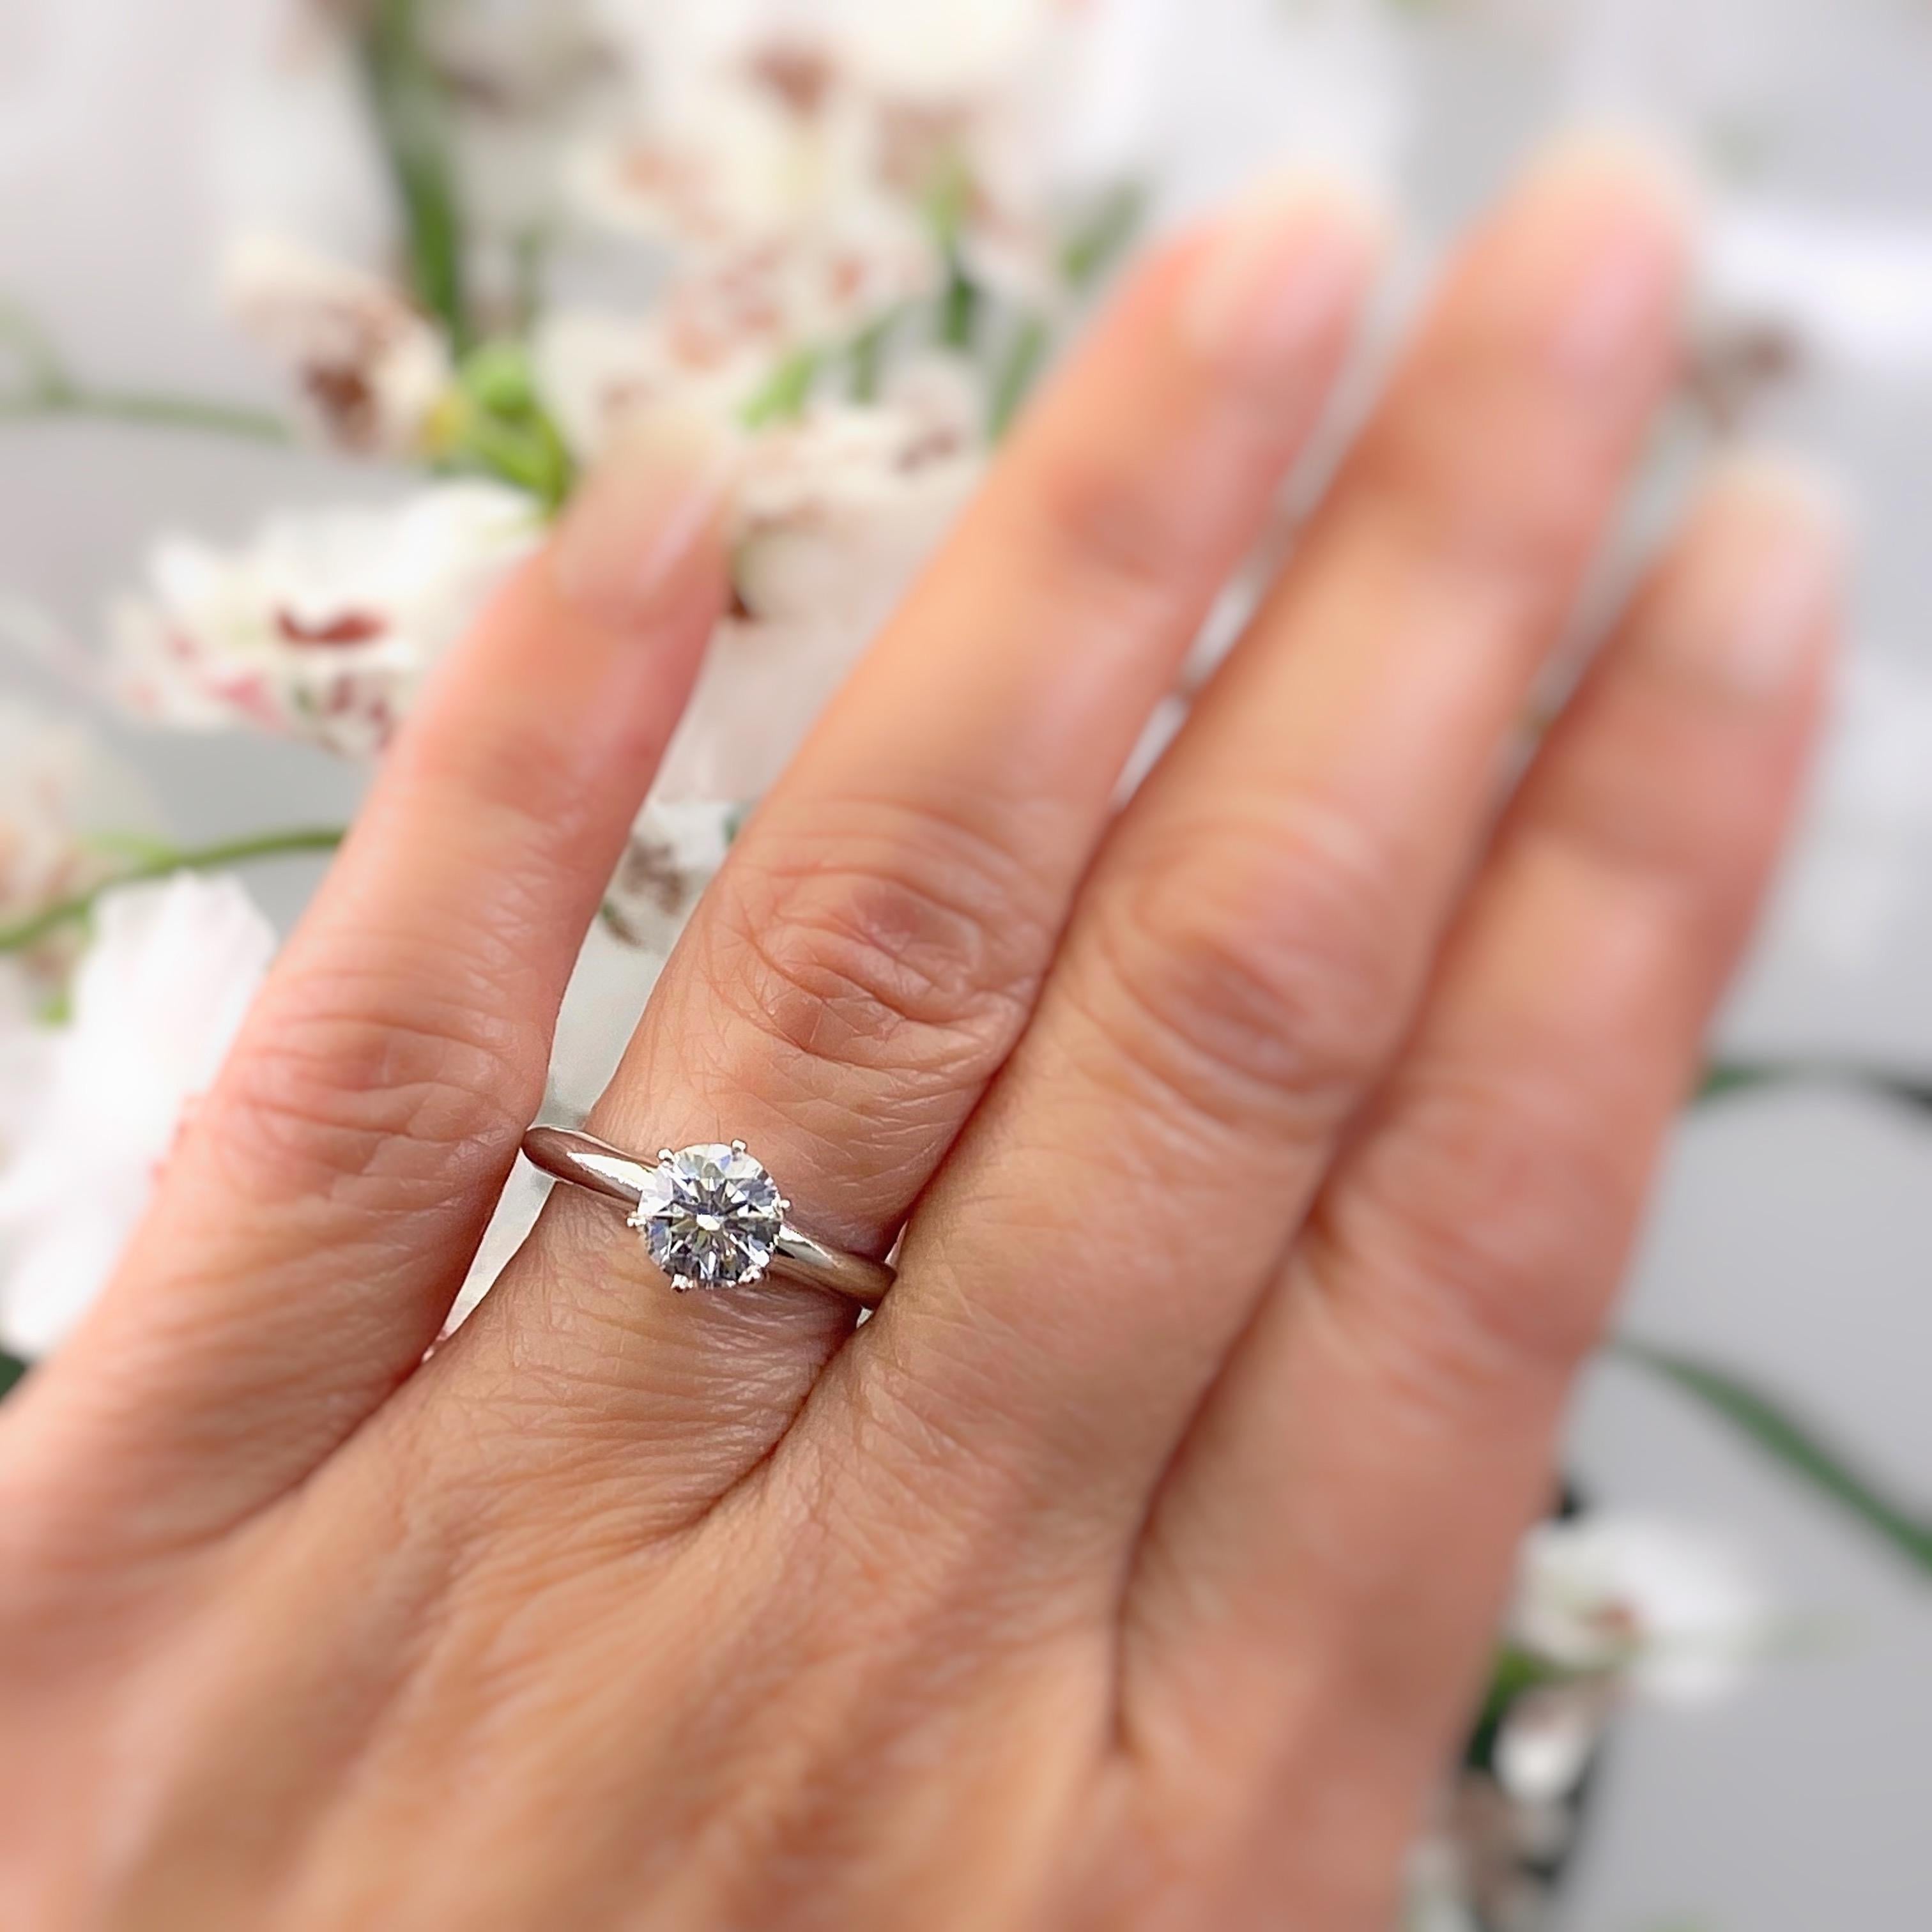 Tiffany & Co. Solitaire Engagement Ring
Style:  Classic 6-Prong Solitaire
Metal:  Platinum PT950
Size:  5.75 - sizable
TCW:  1.03 cts
Main Diamond:  Round Brilliant Diamond 1.03 cts
Color & Clarity:  G / VS1
Hallmark:  ©TIFFANY&CO.PT950 32835052